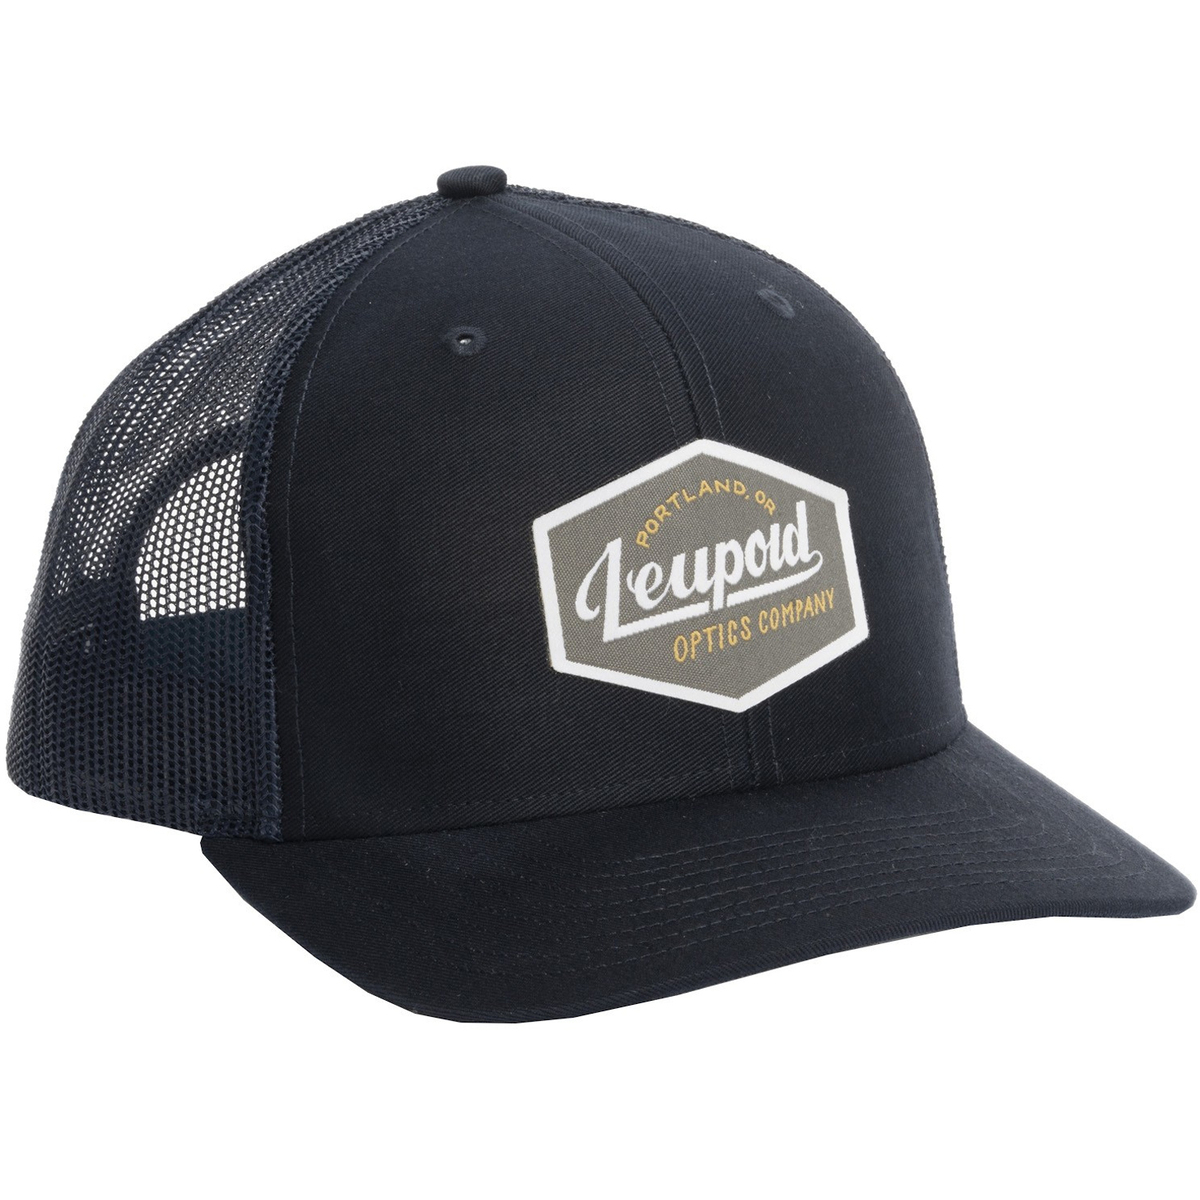 Leupold Gray Label Trucker Hat - Navy - Navy One Size Fits Most ...